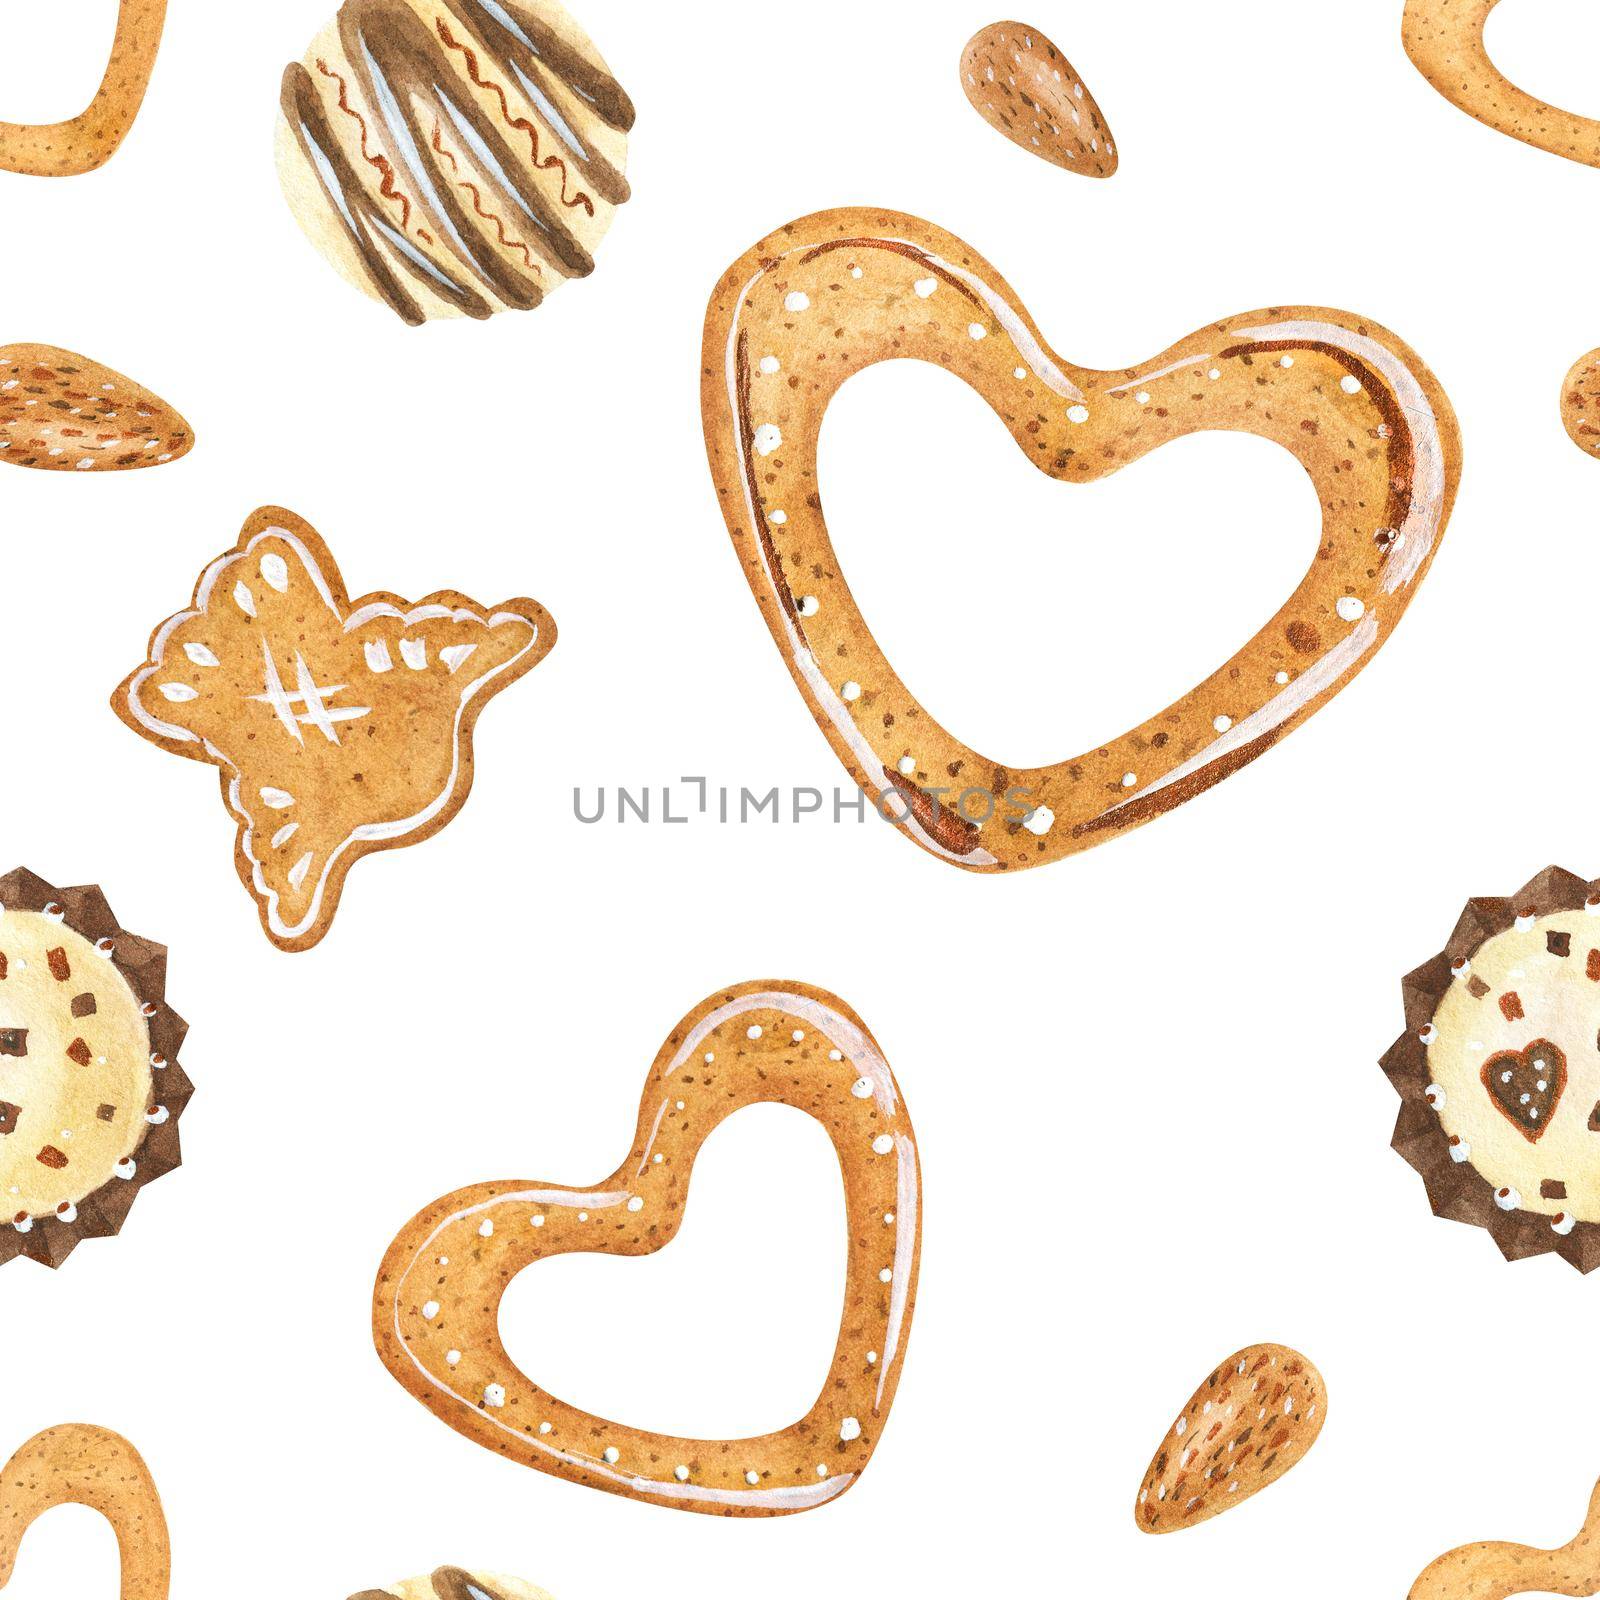 Sweet winter seamless pattern with chocolate candies and cookies. Watercolor illustration for any event decoration, white background, path included